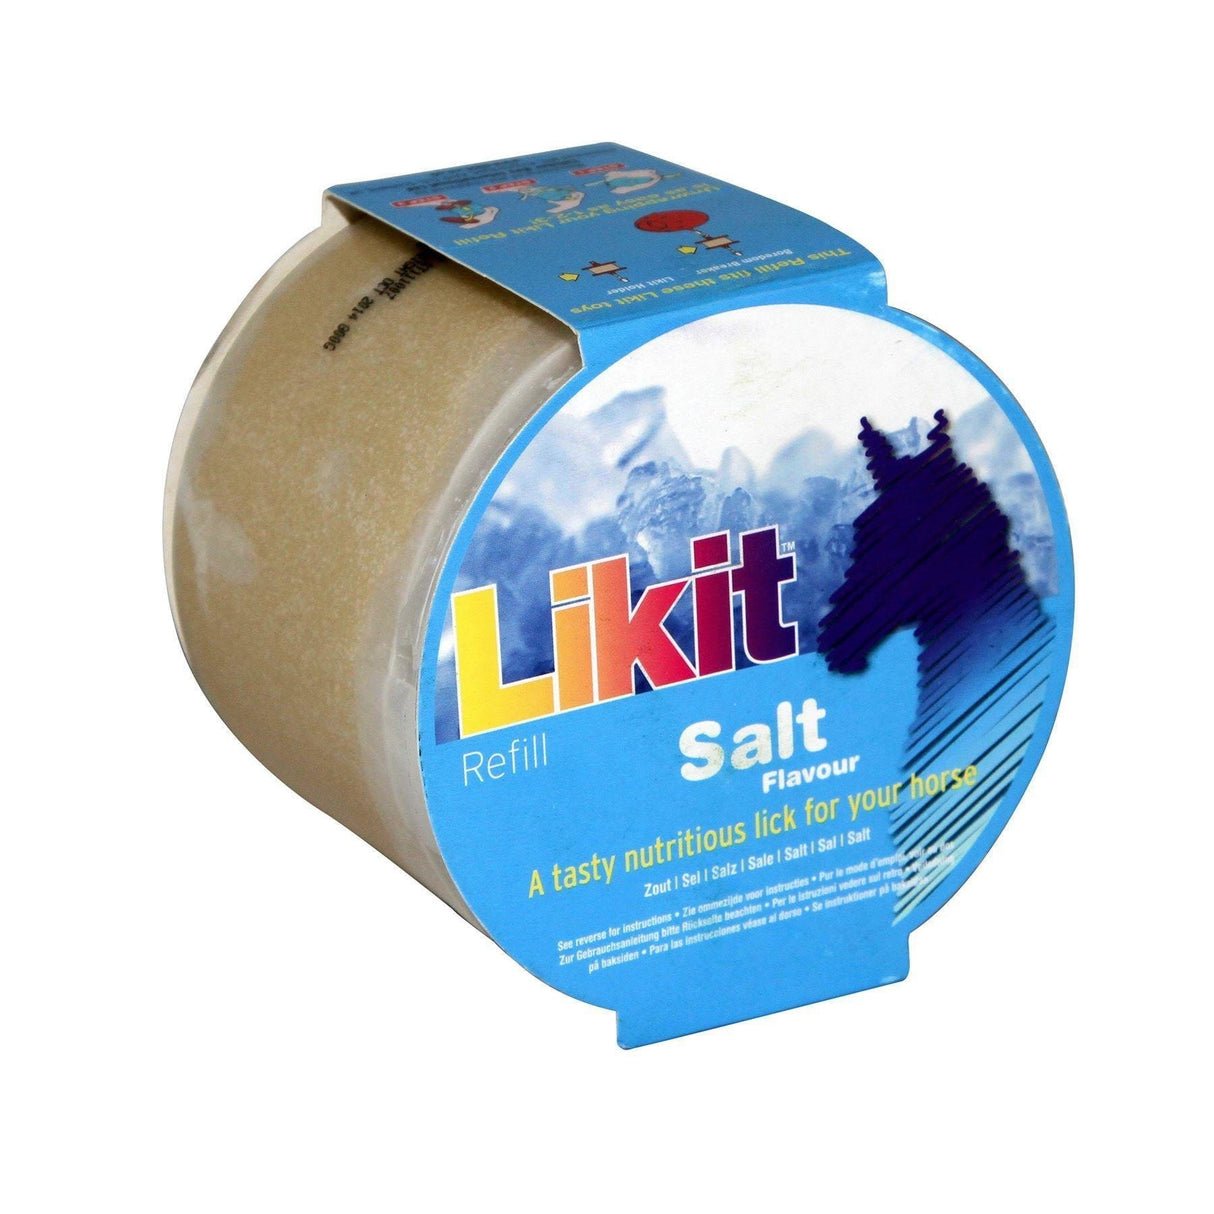 Likit Pack of 12 #flavour_salt